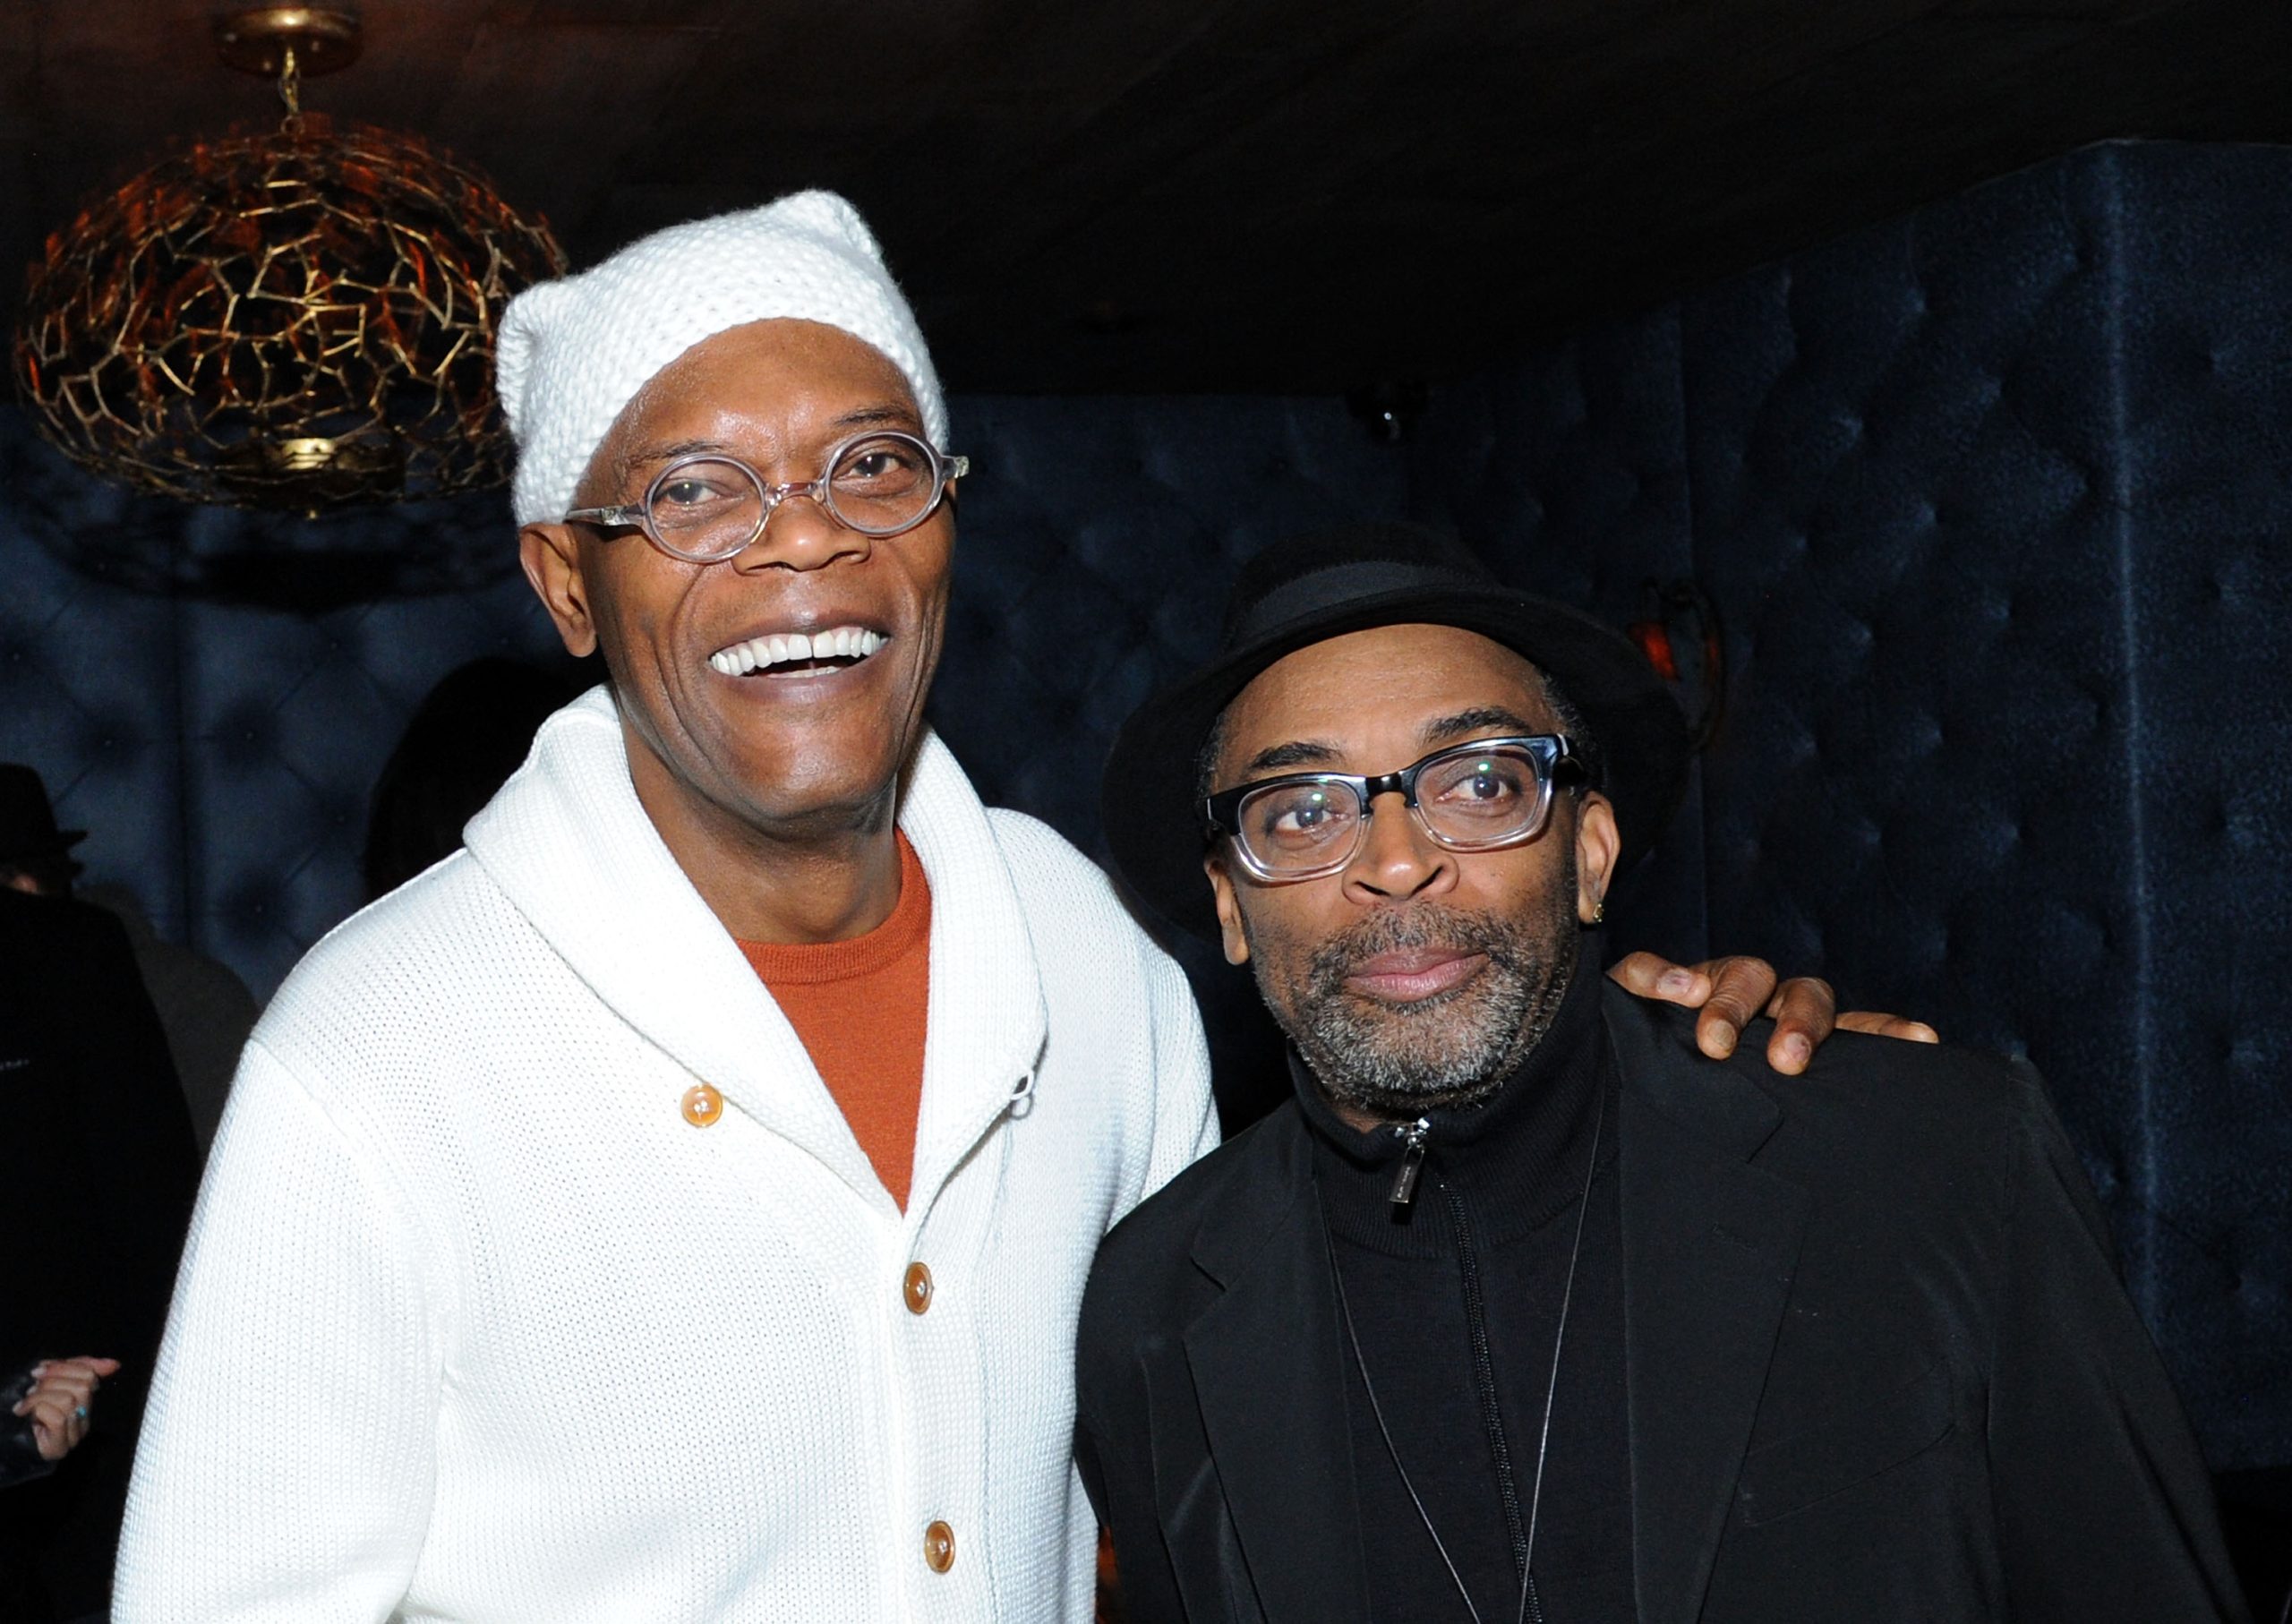 Samuel L. Jackson and Spike Lee at the "Oldboy" premiere in 2013